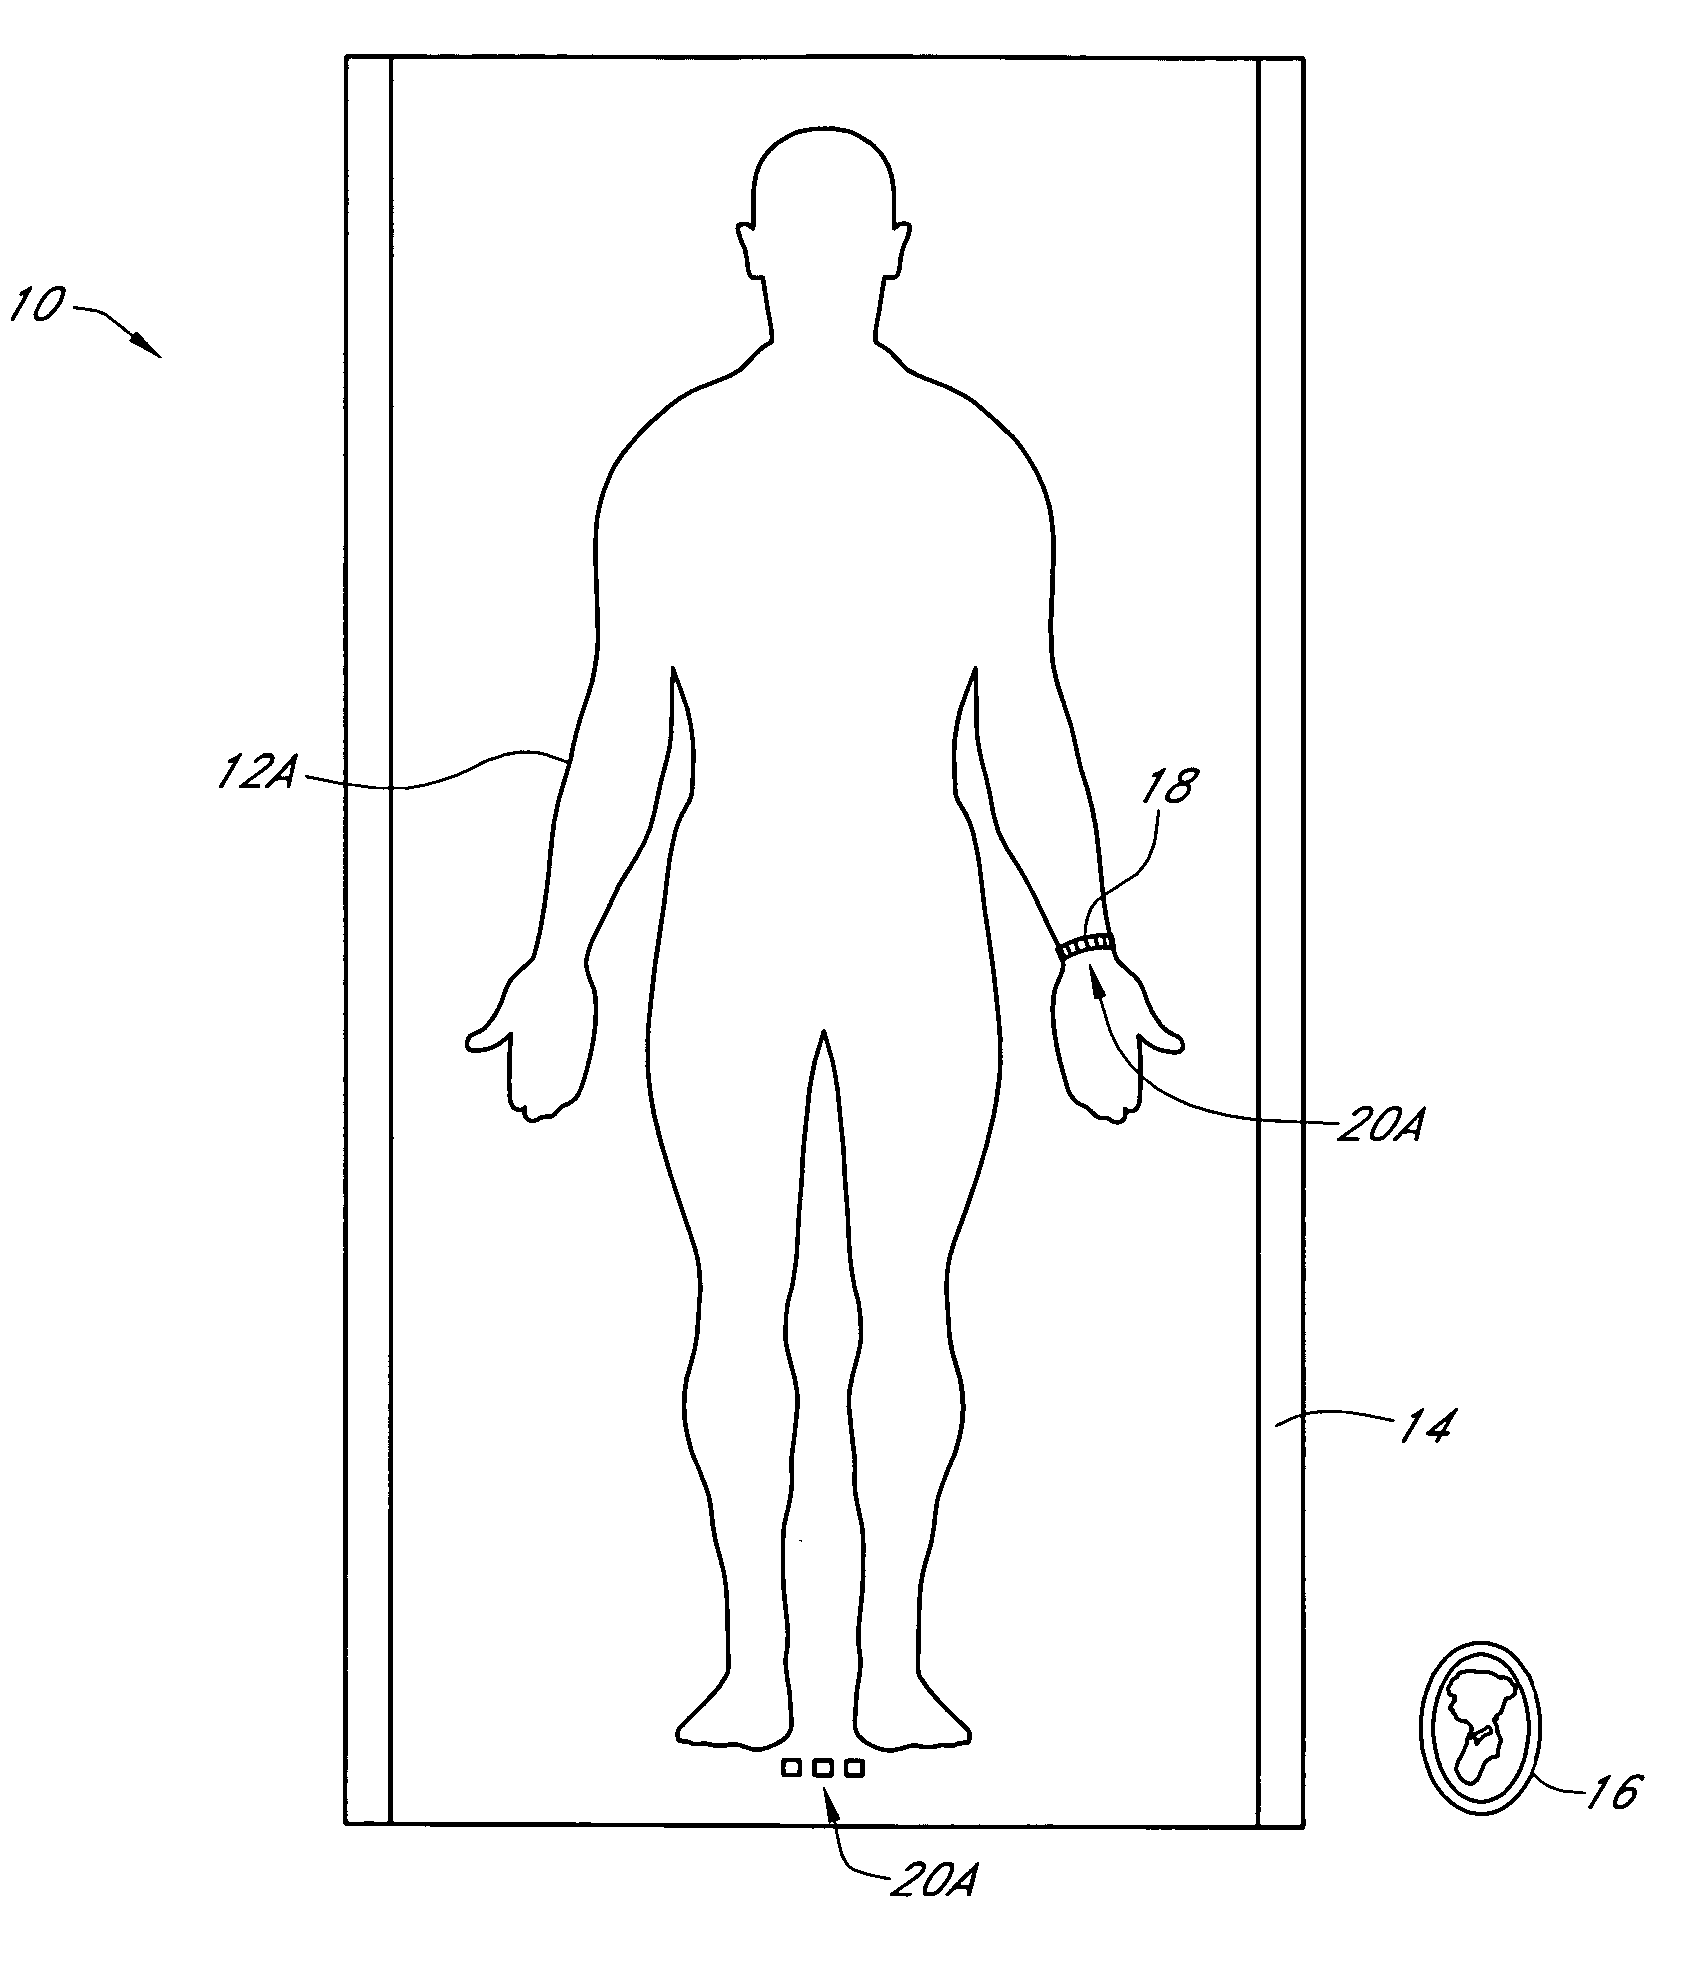 Synthetic biometric article and method for use of same